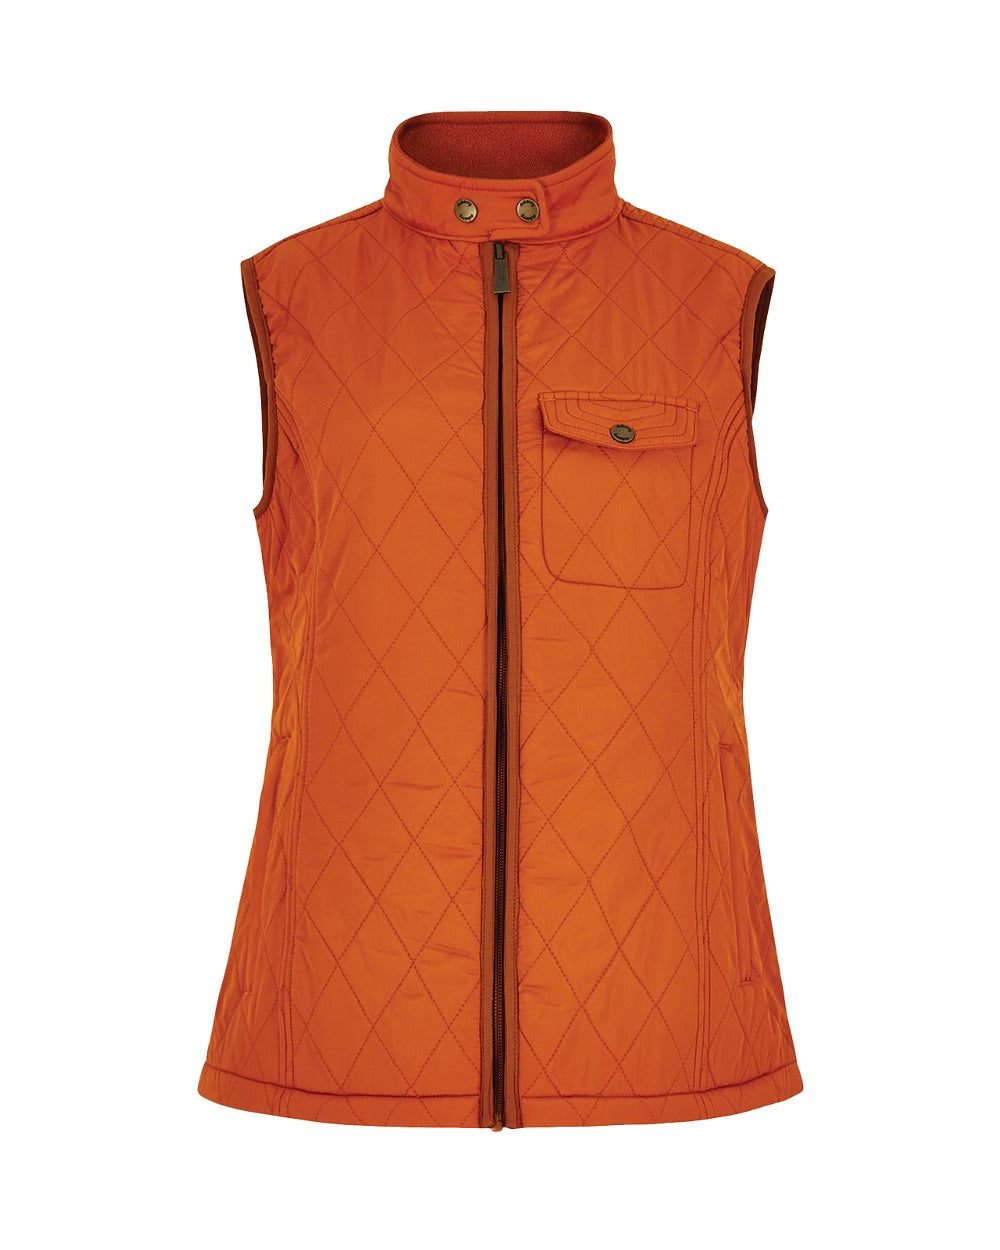 Dubarry Rathdown Quilted Gilet in Cayenne 